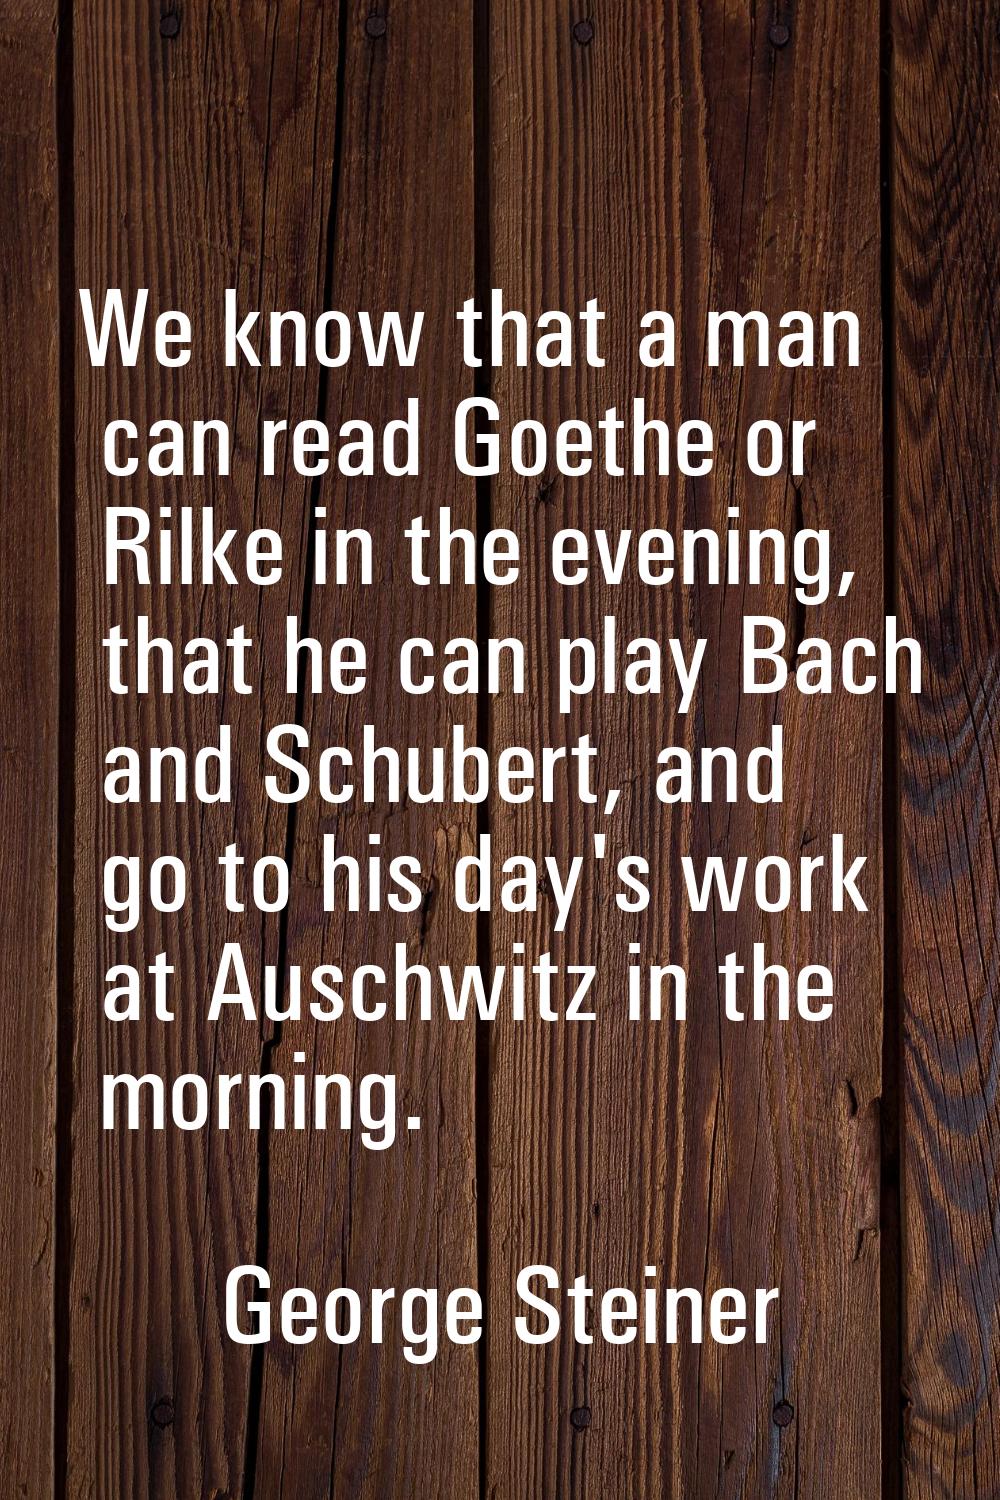 We know that a man can read Goethe or Rilke in the evening, that he can play Bach and Schubert, and